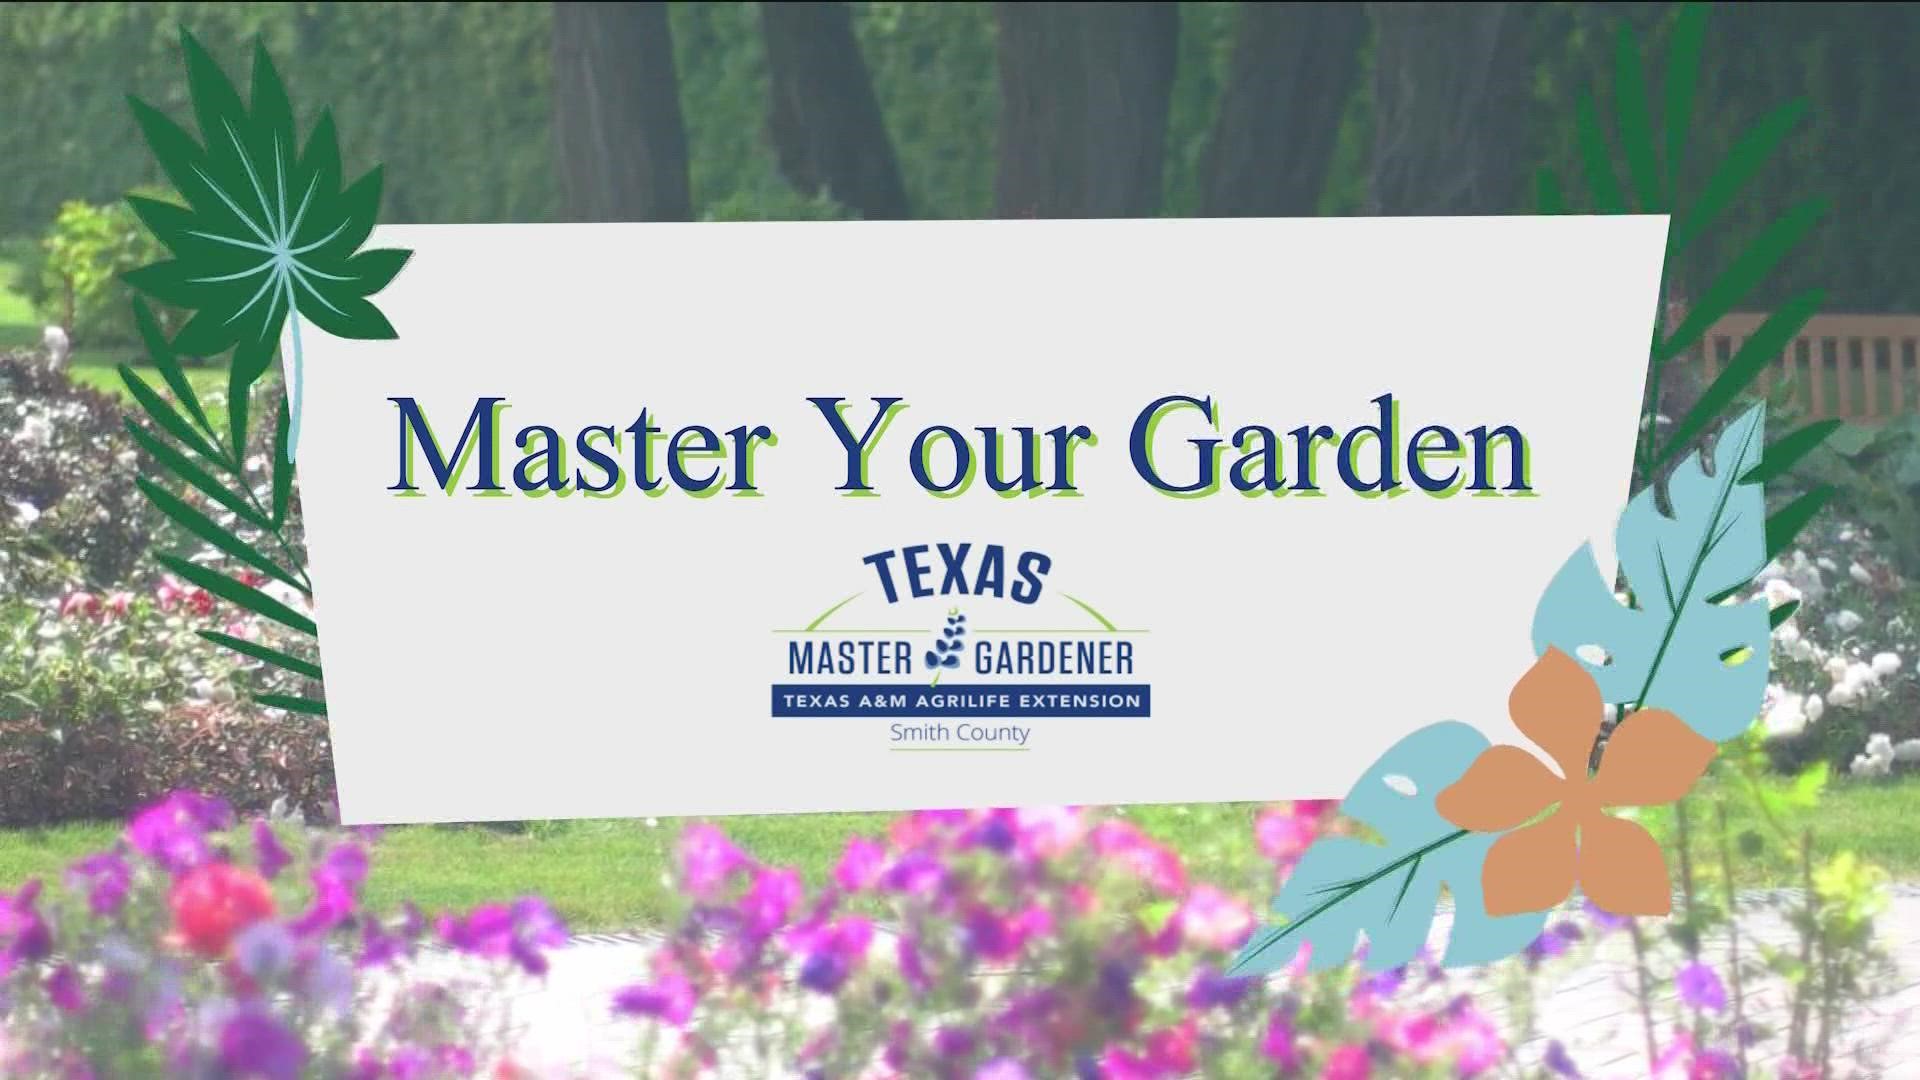 A Smith County master gardener explains the difference between pests and beneficial insects, and how to keep your garden healthy to protect the right insects